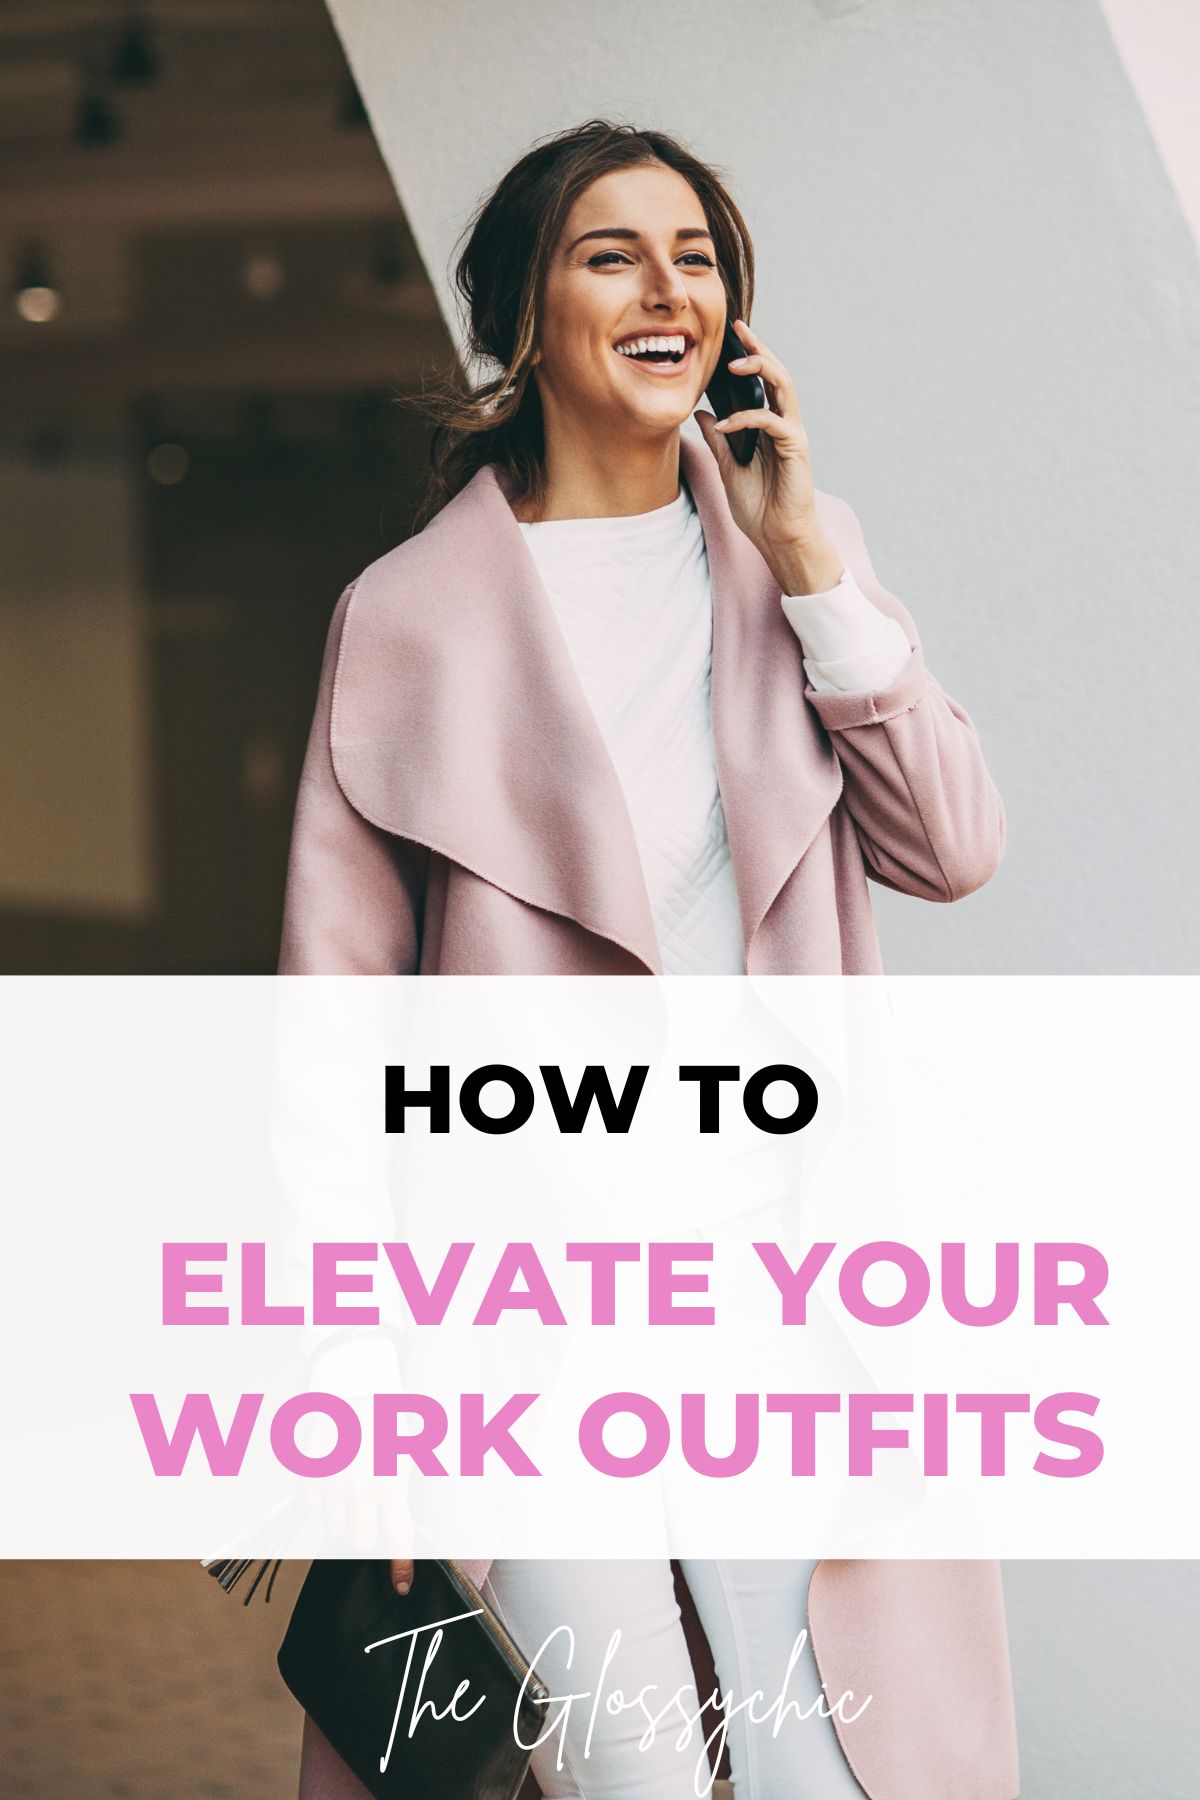 6 Tips To Elevate Your Work Outfits